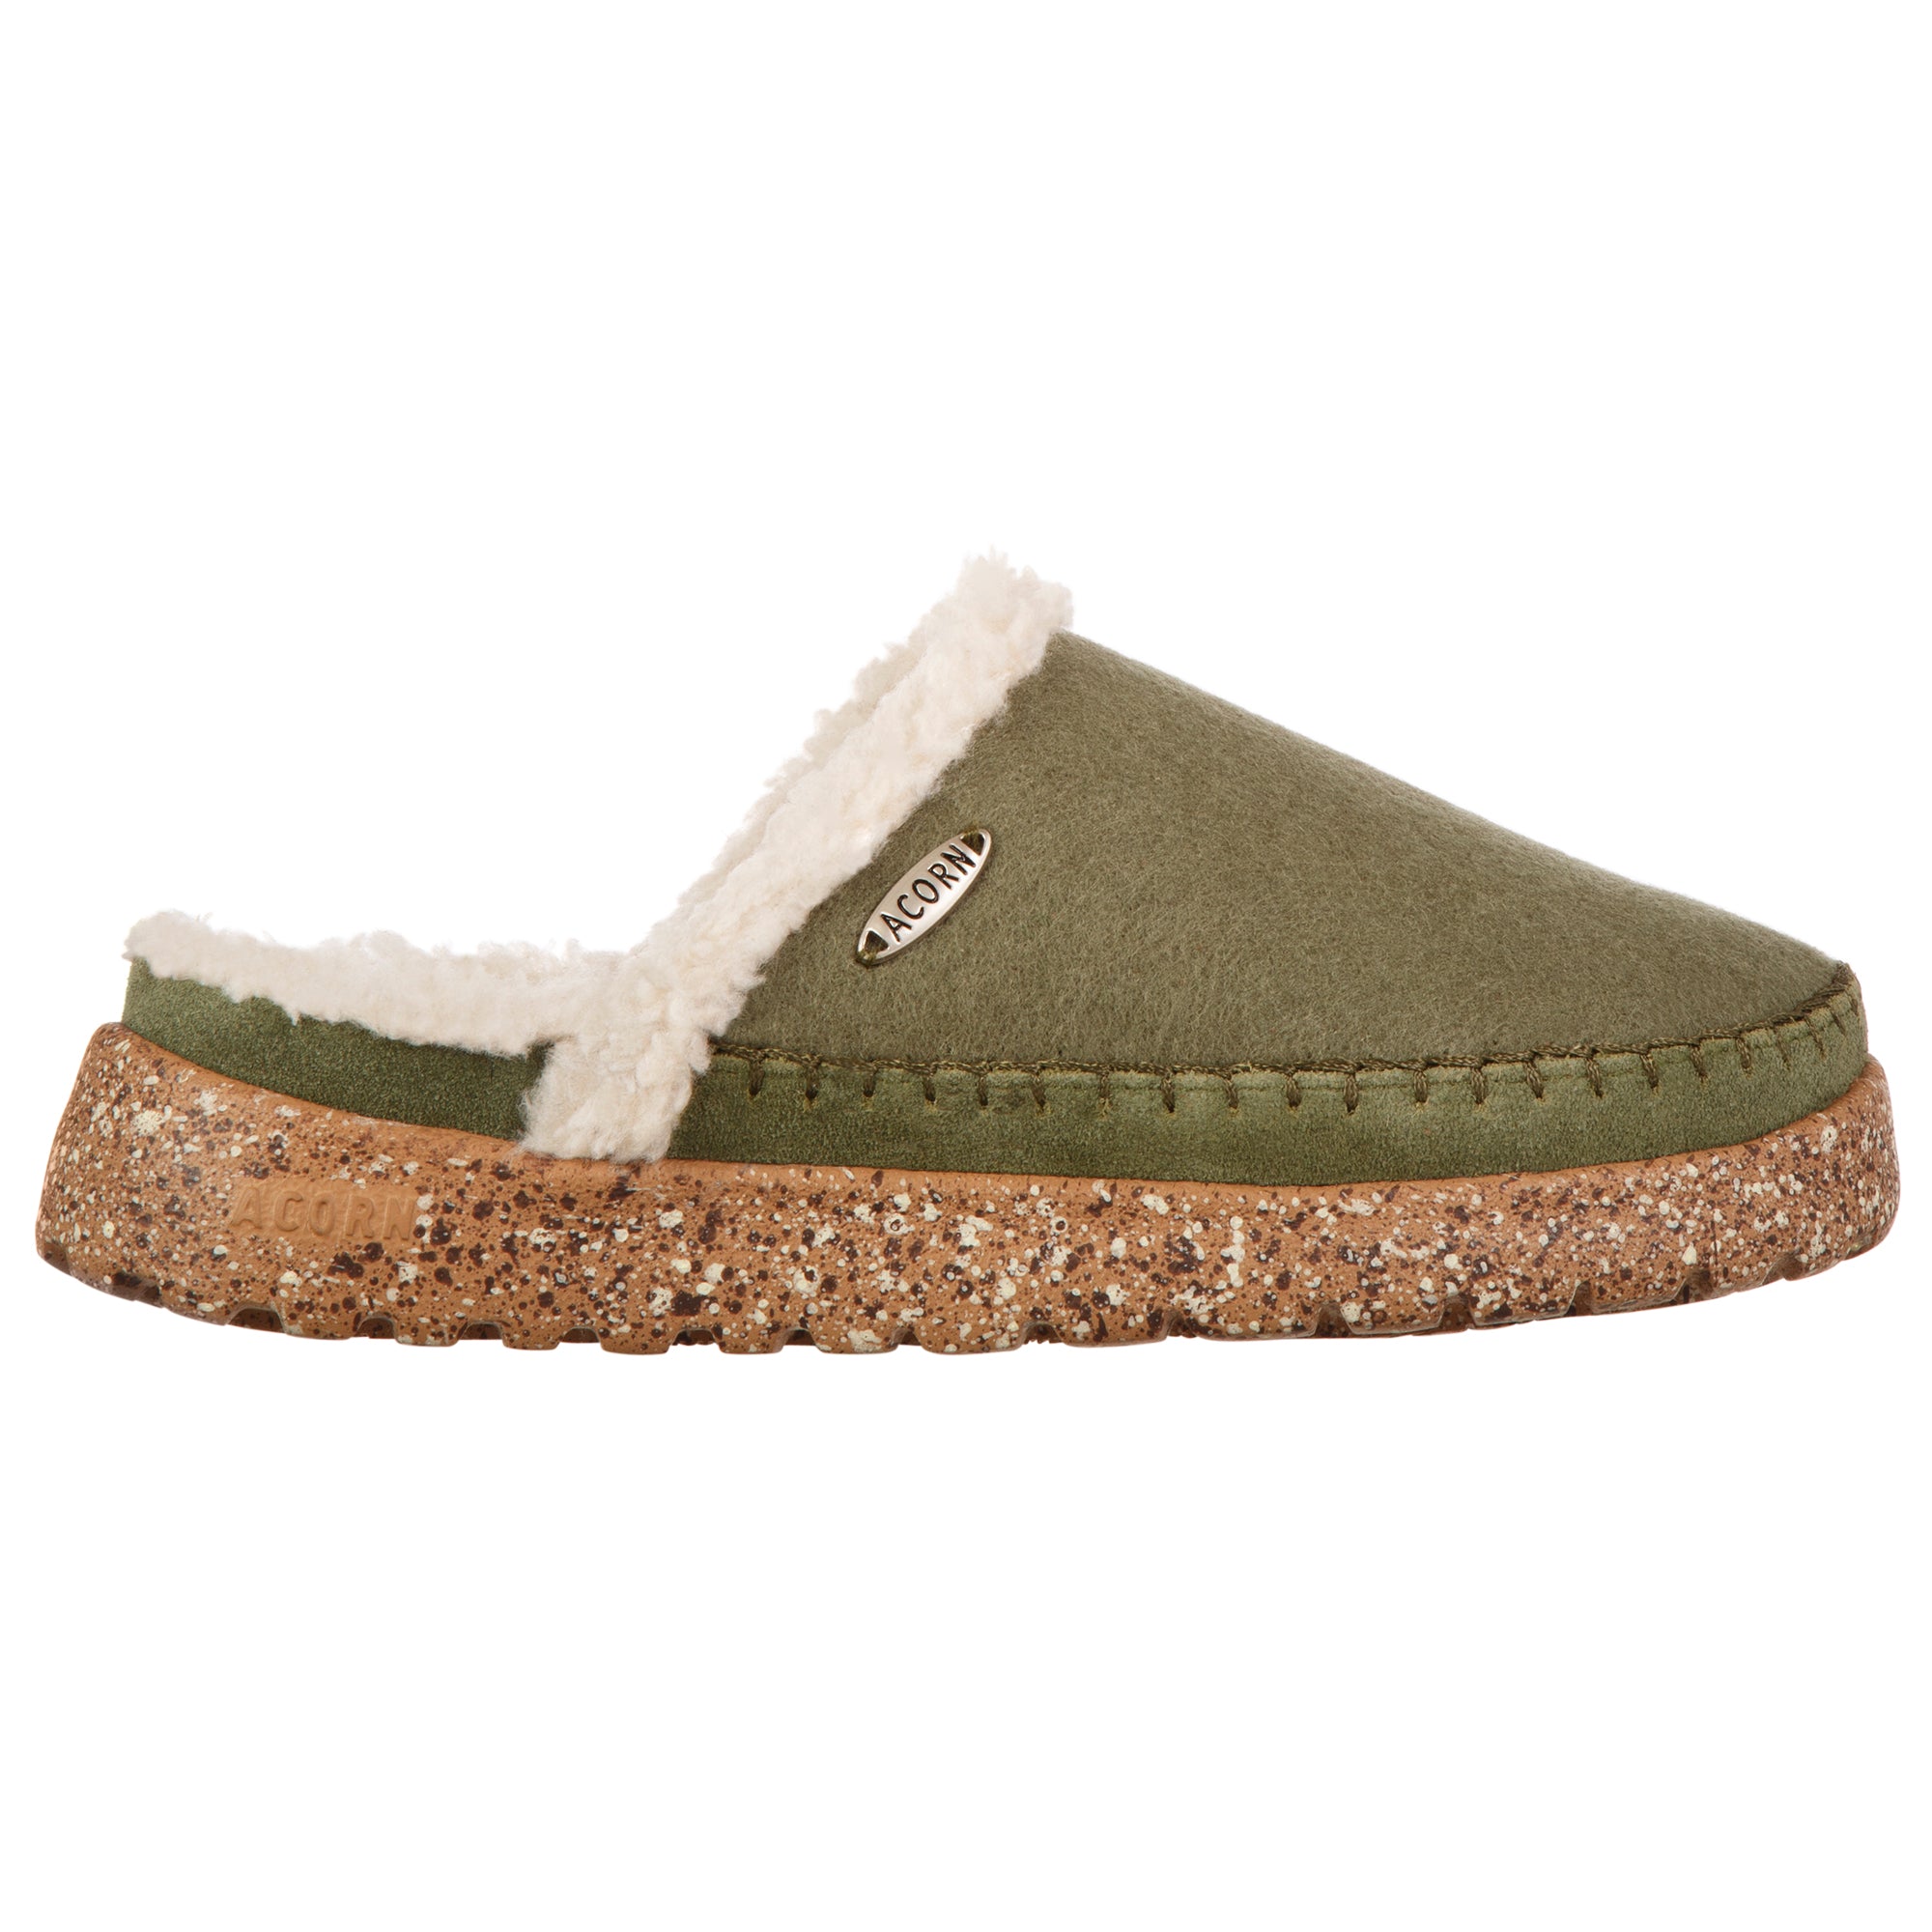 Women’s Acorn Recycled Rockland Clog - olive side view